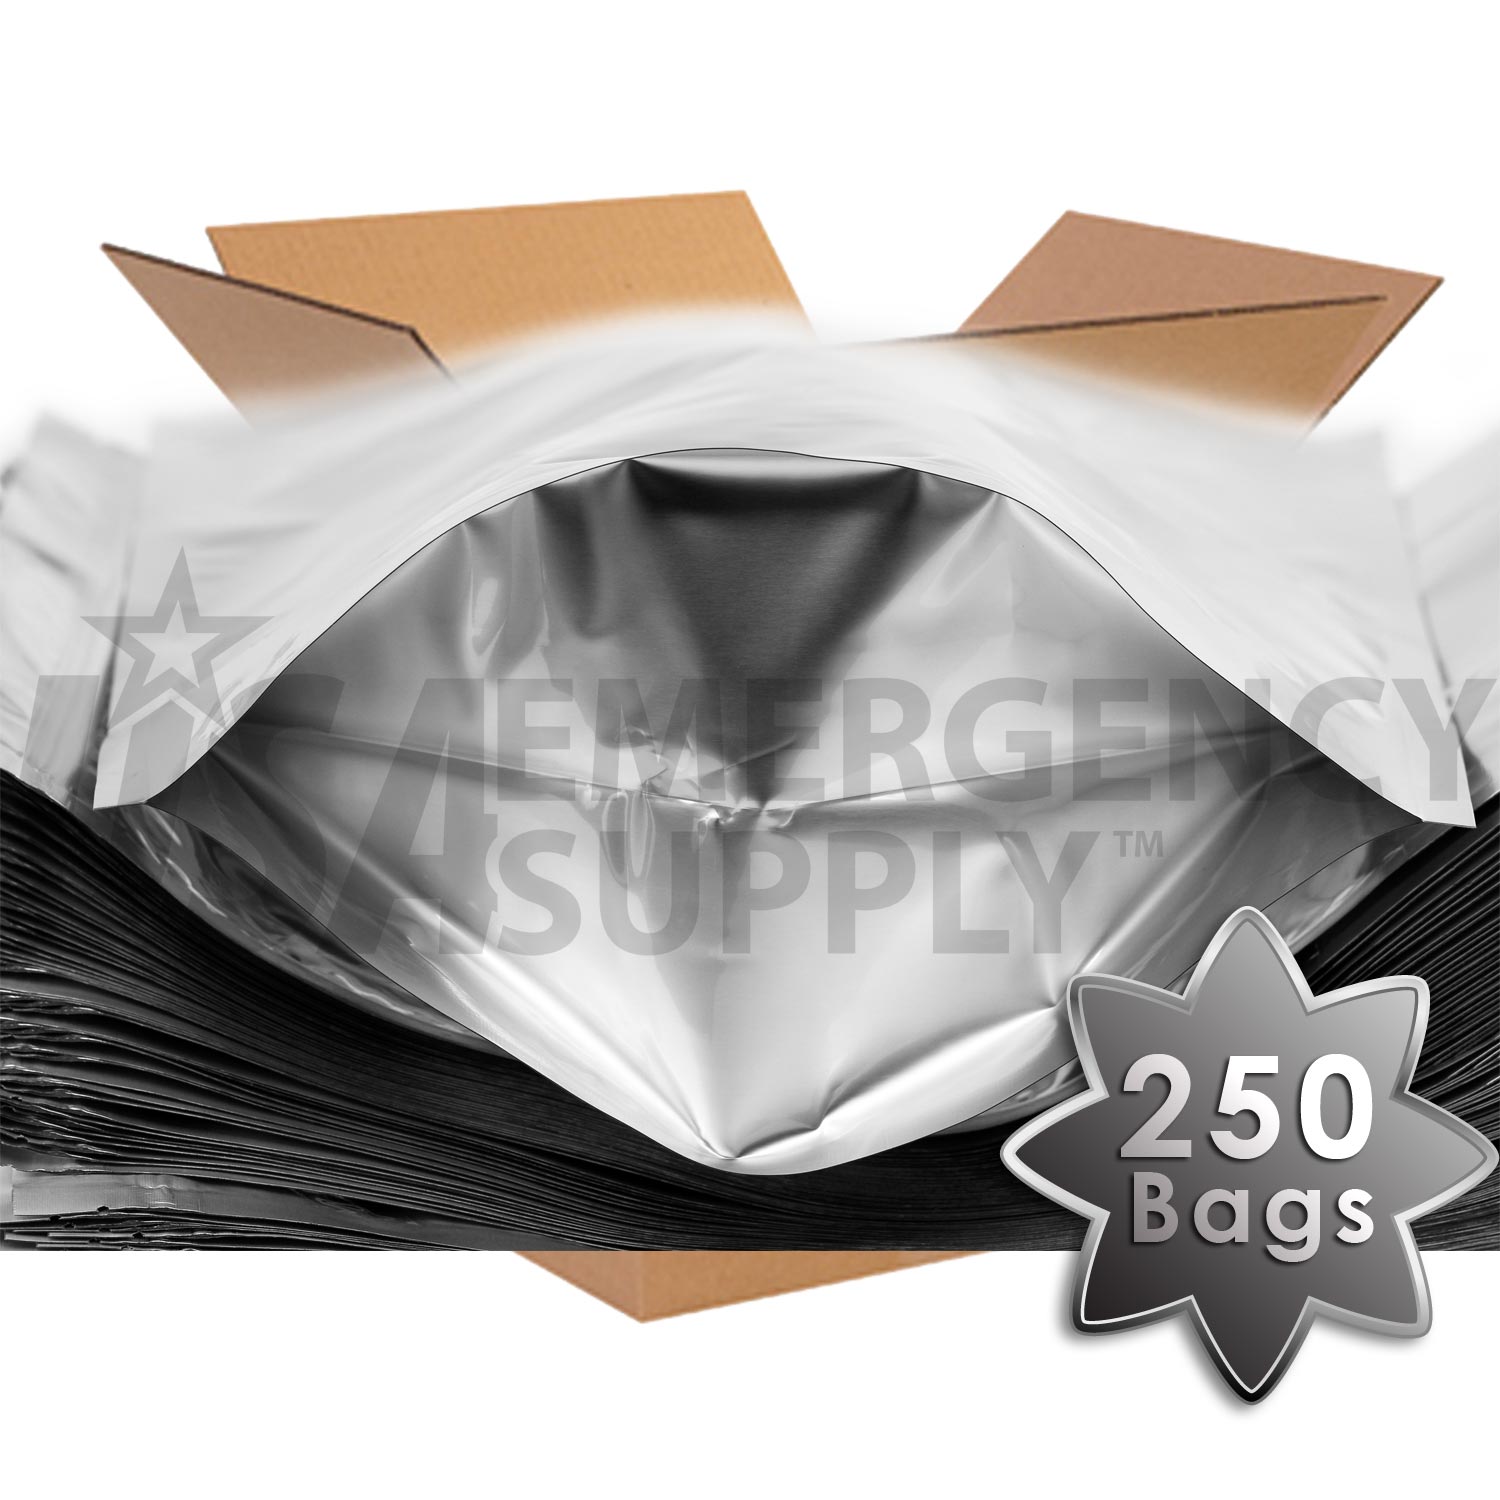 10 x Resealable 5 Gallon Mylar Bags – Grain Storage – on sale for $19.99,  $2 each + free prime ship